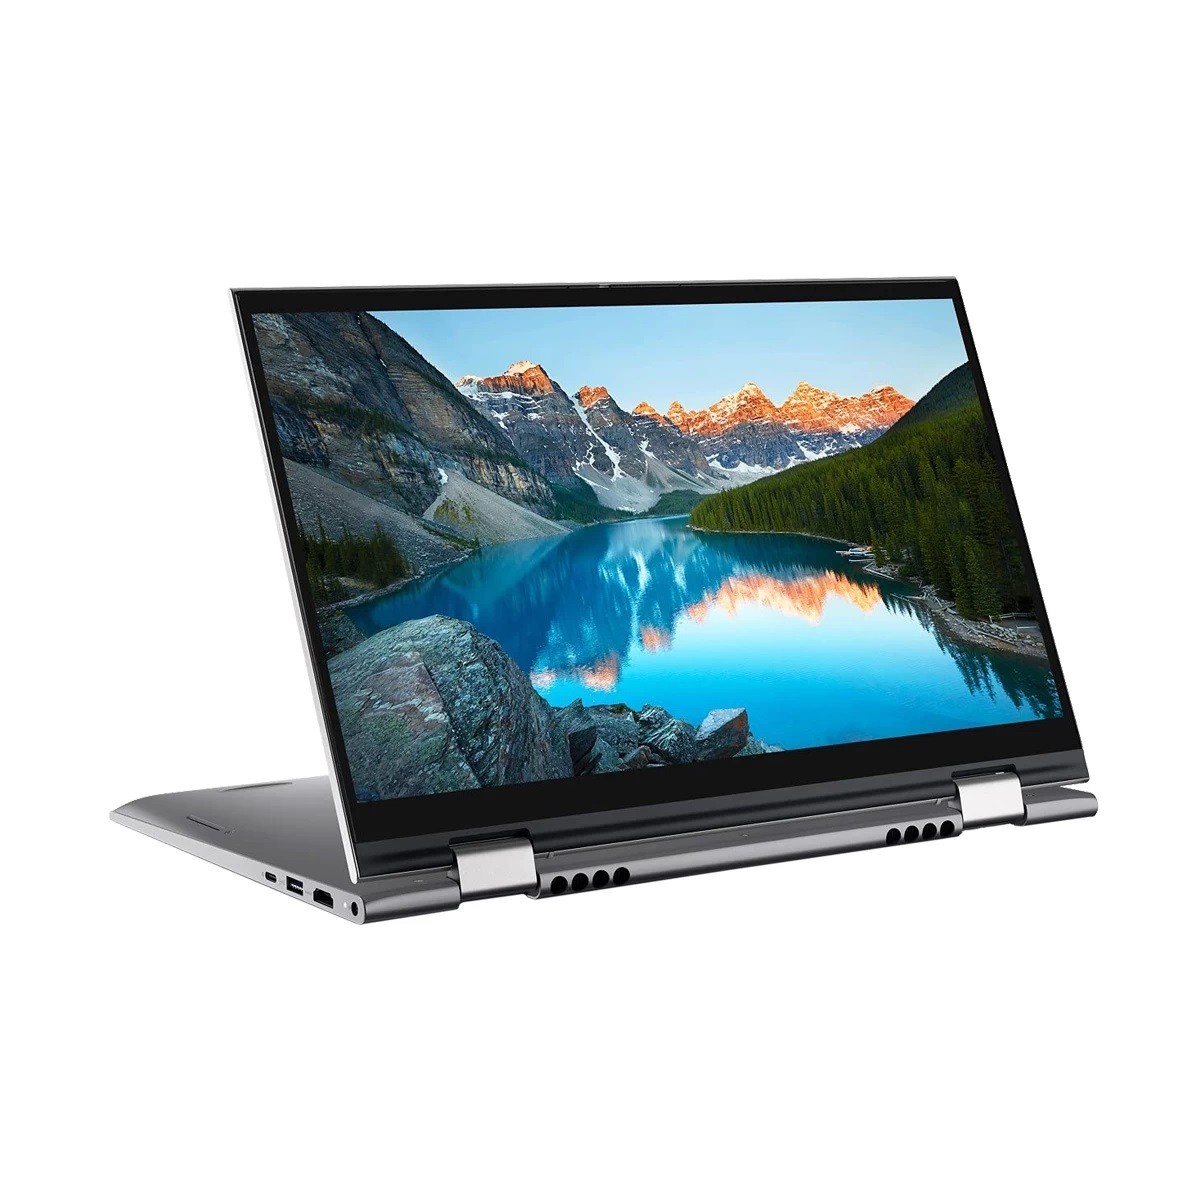 Dell Inspiron 14 2 in1 5410 Intel i7 11th Gen 1165G7 Up to 4.70 GHz with 2GB Graphics Touch Laptop